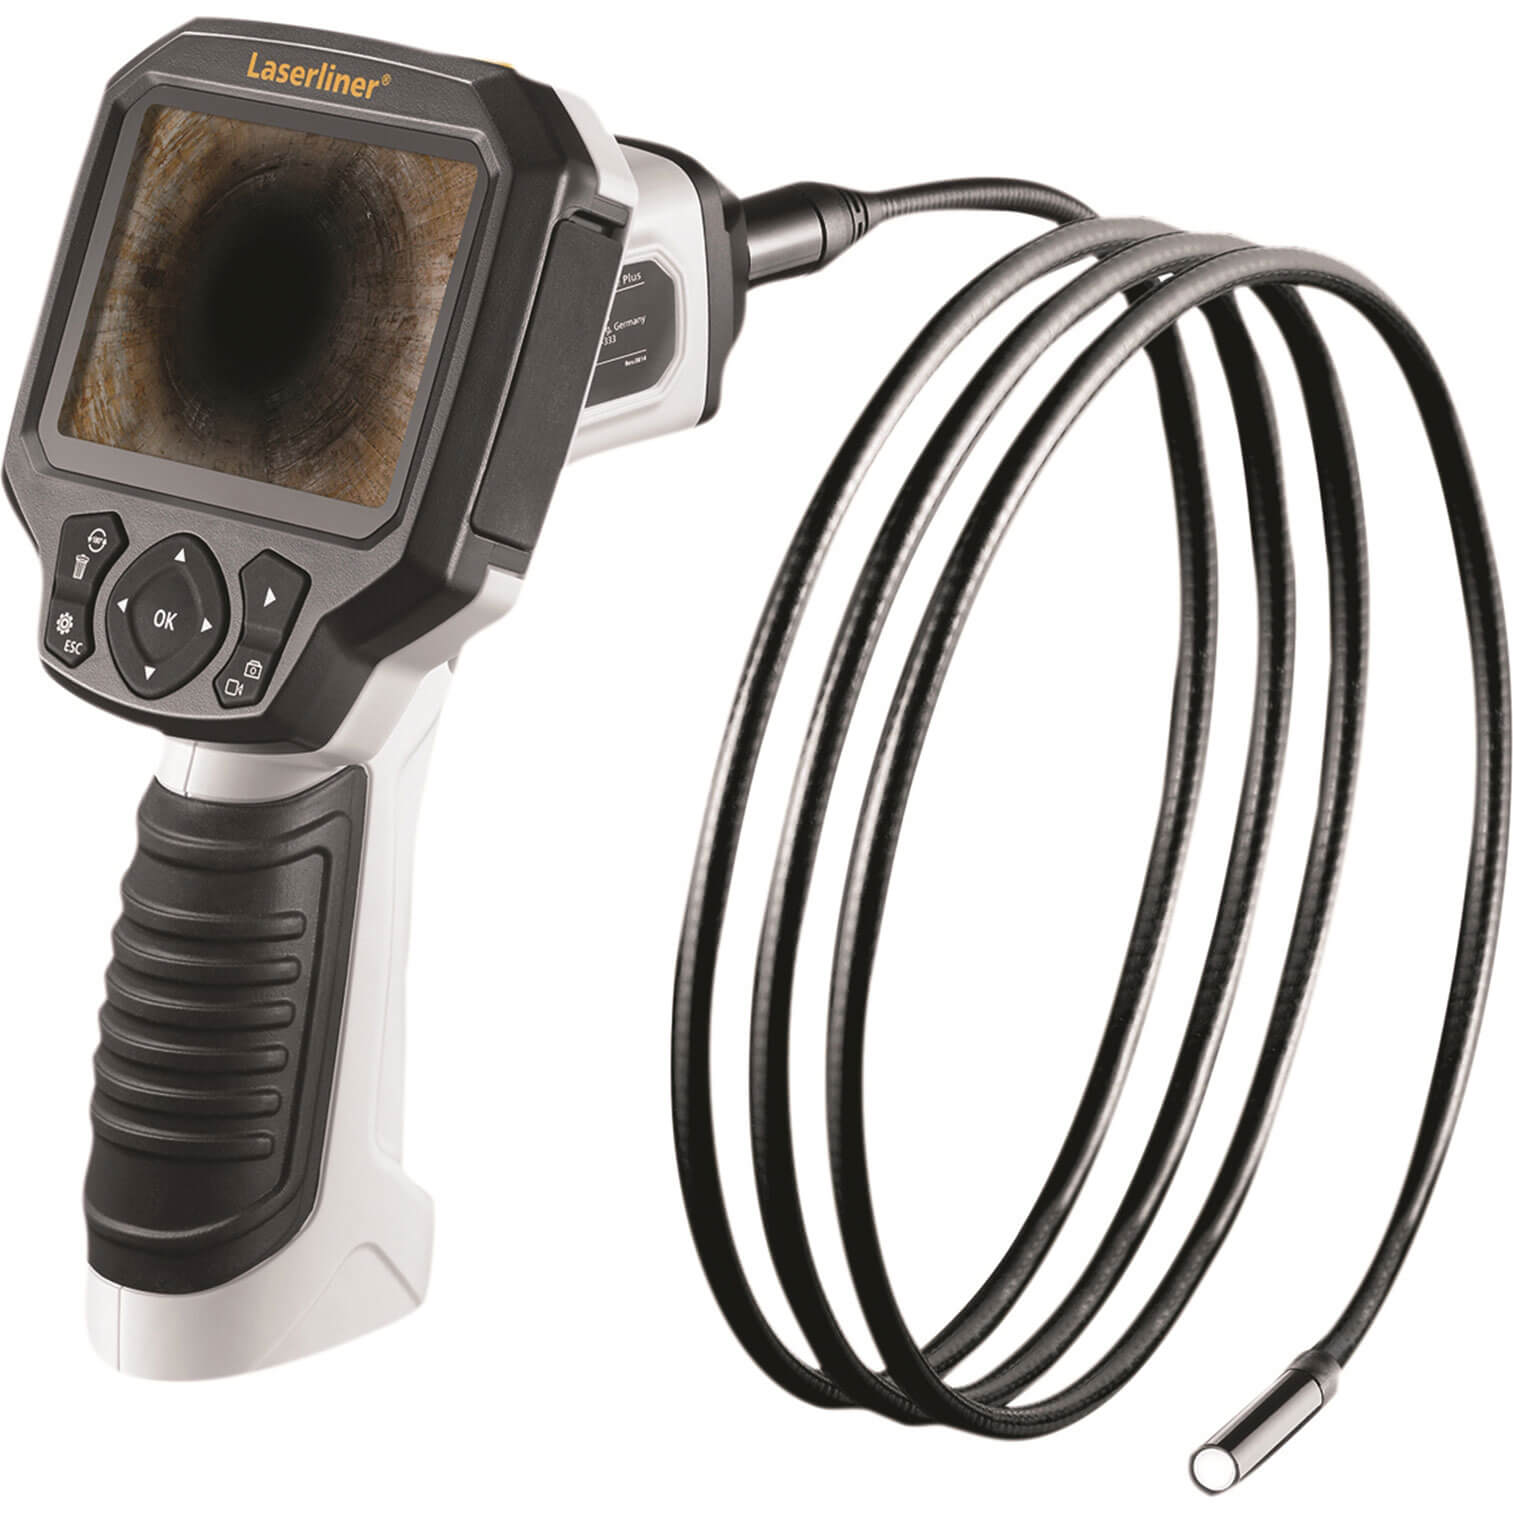 Image of LaserLiner Videoscope Plus Recordable Inspection Camera 2 Metre Long